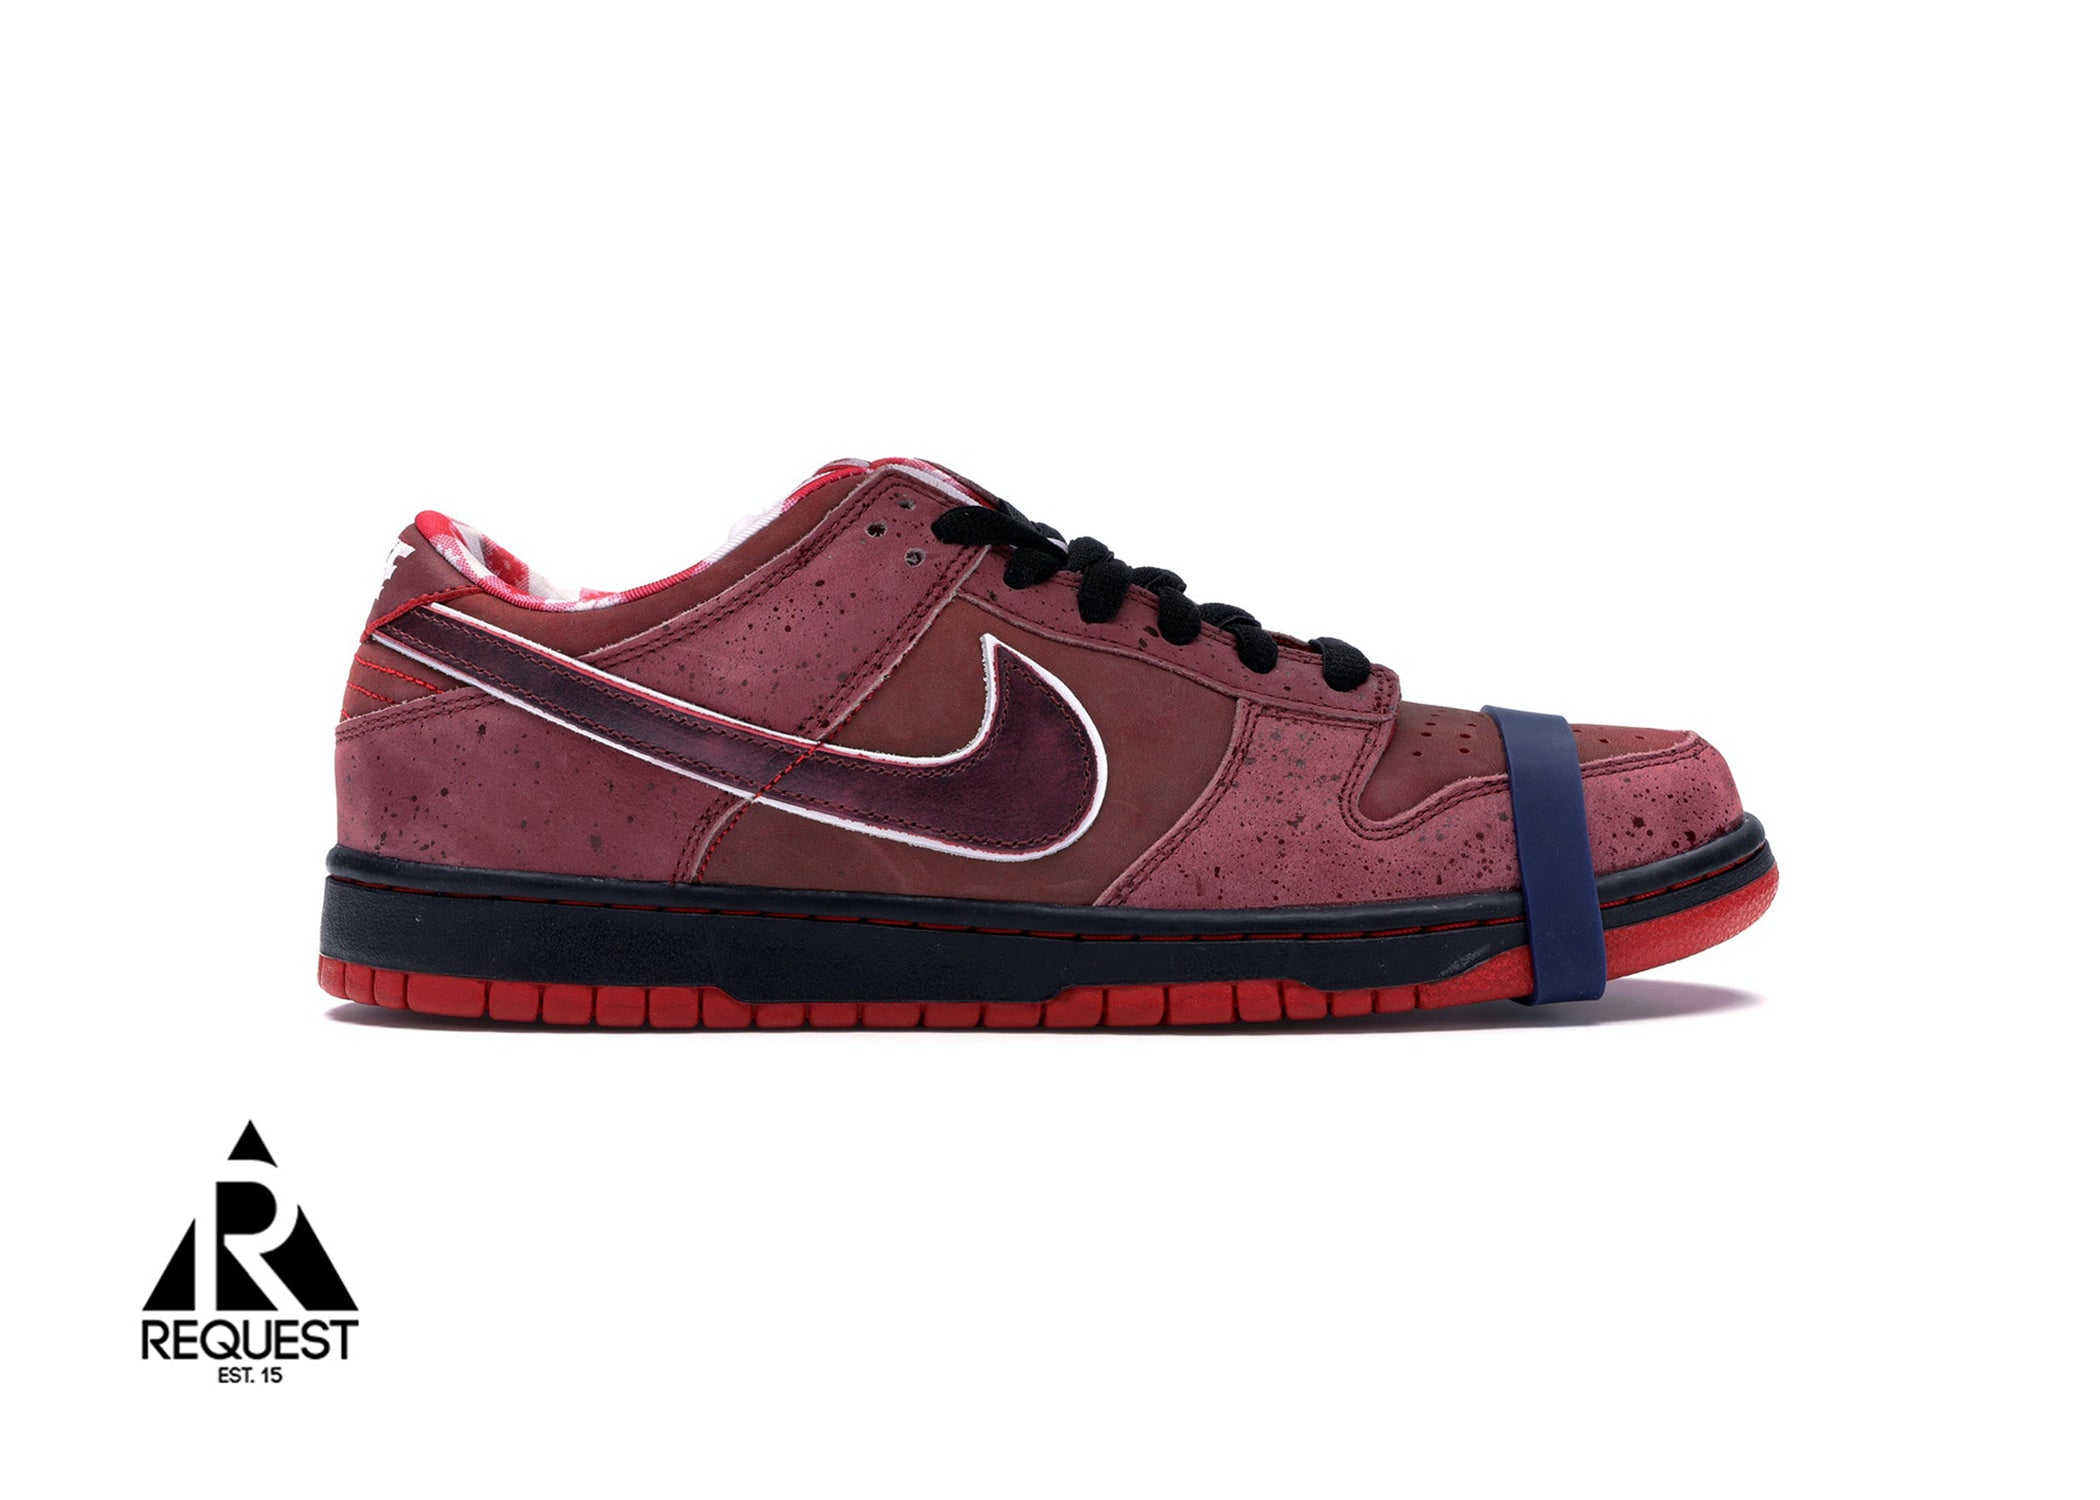 Nike SB Dunk Low “Red Lobster”